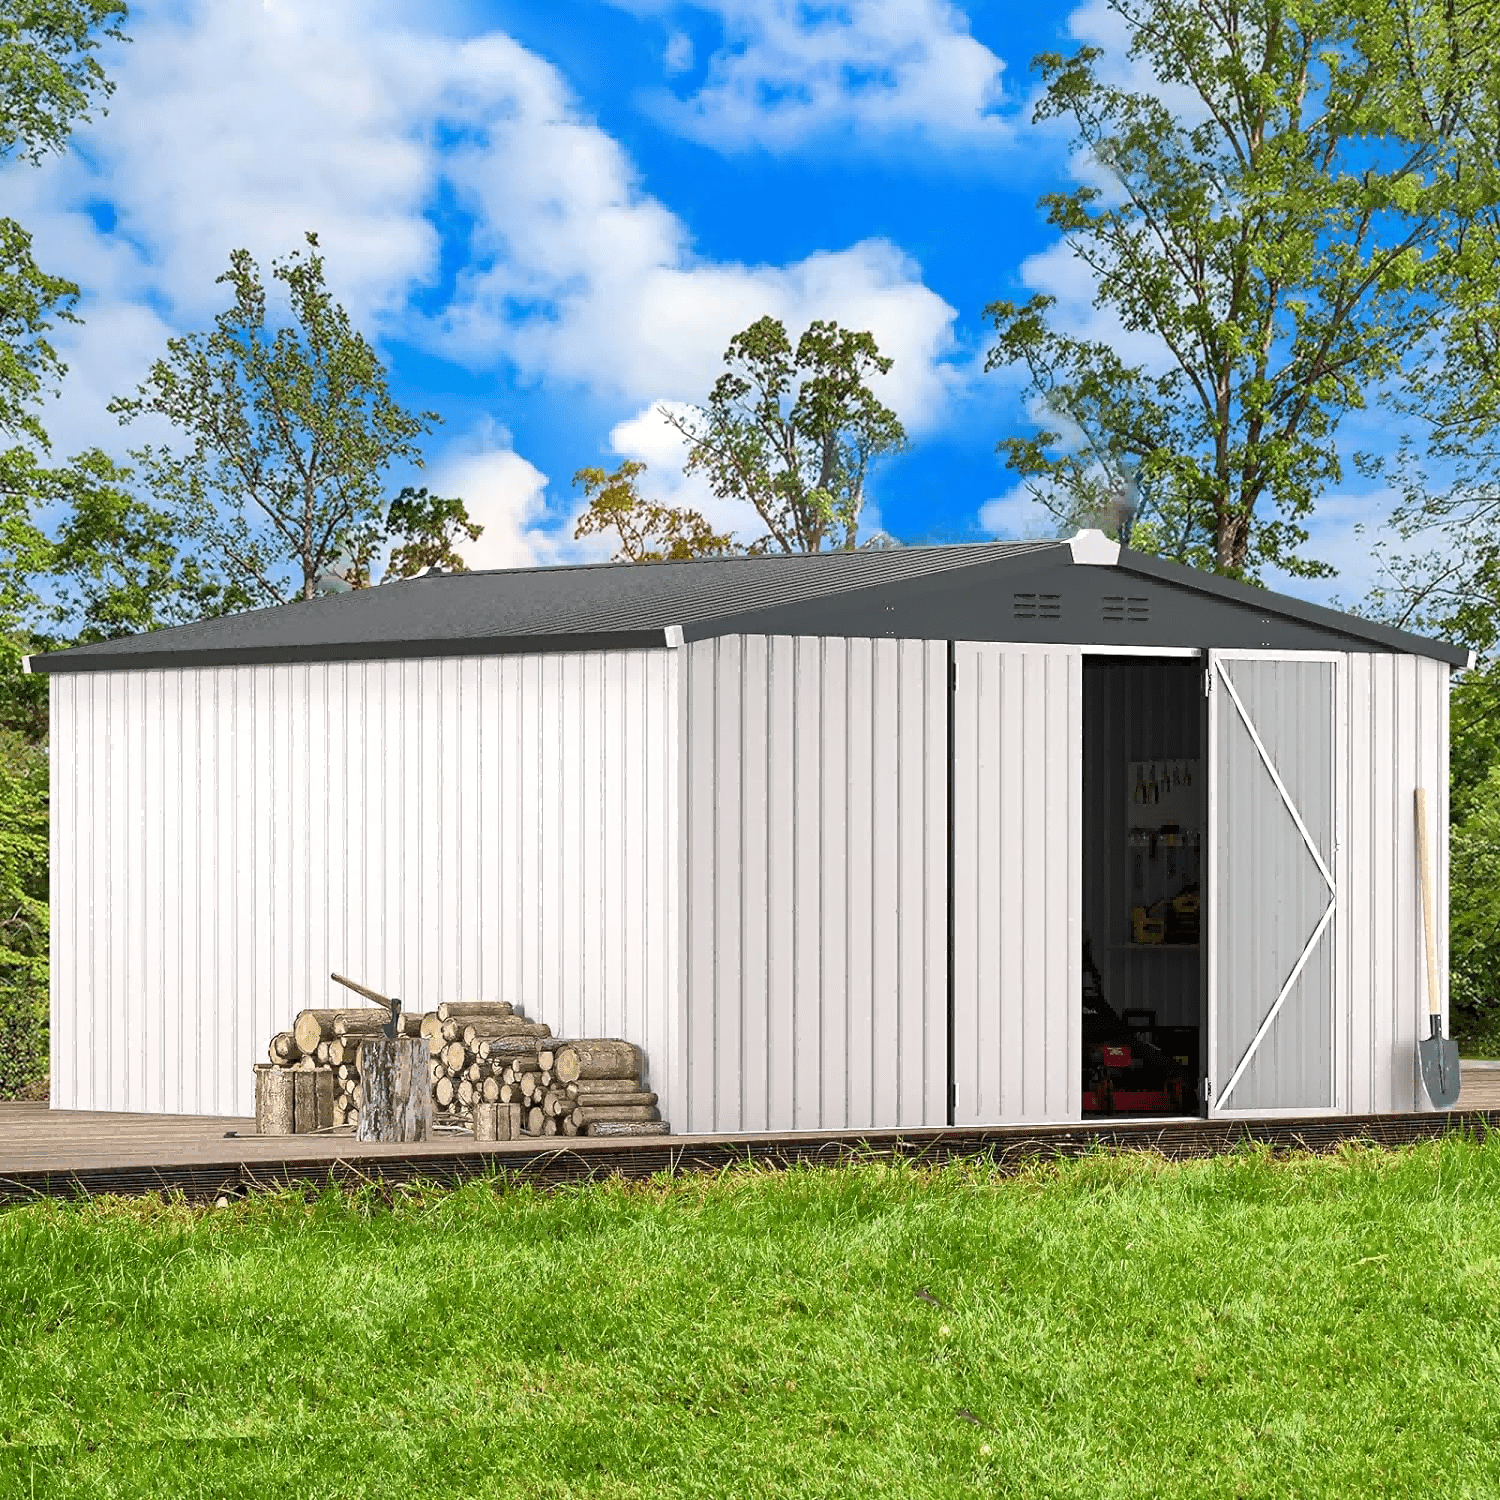 

12' X 12' Shed Metal, & Outdoor Storage 12' X 12' With Lockable Doors, Large Steel Yard Shed, Utility And Tool Storage For Garden, Backyard, Patio, Outside Use In White